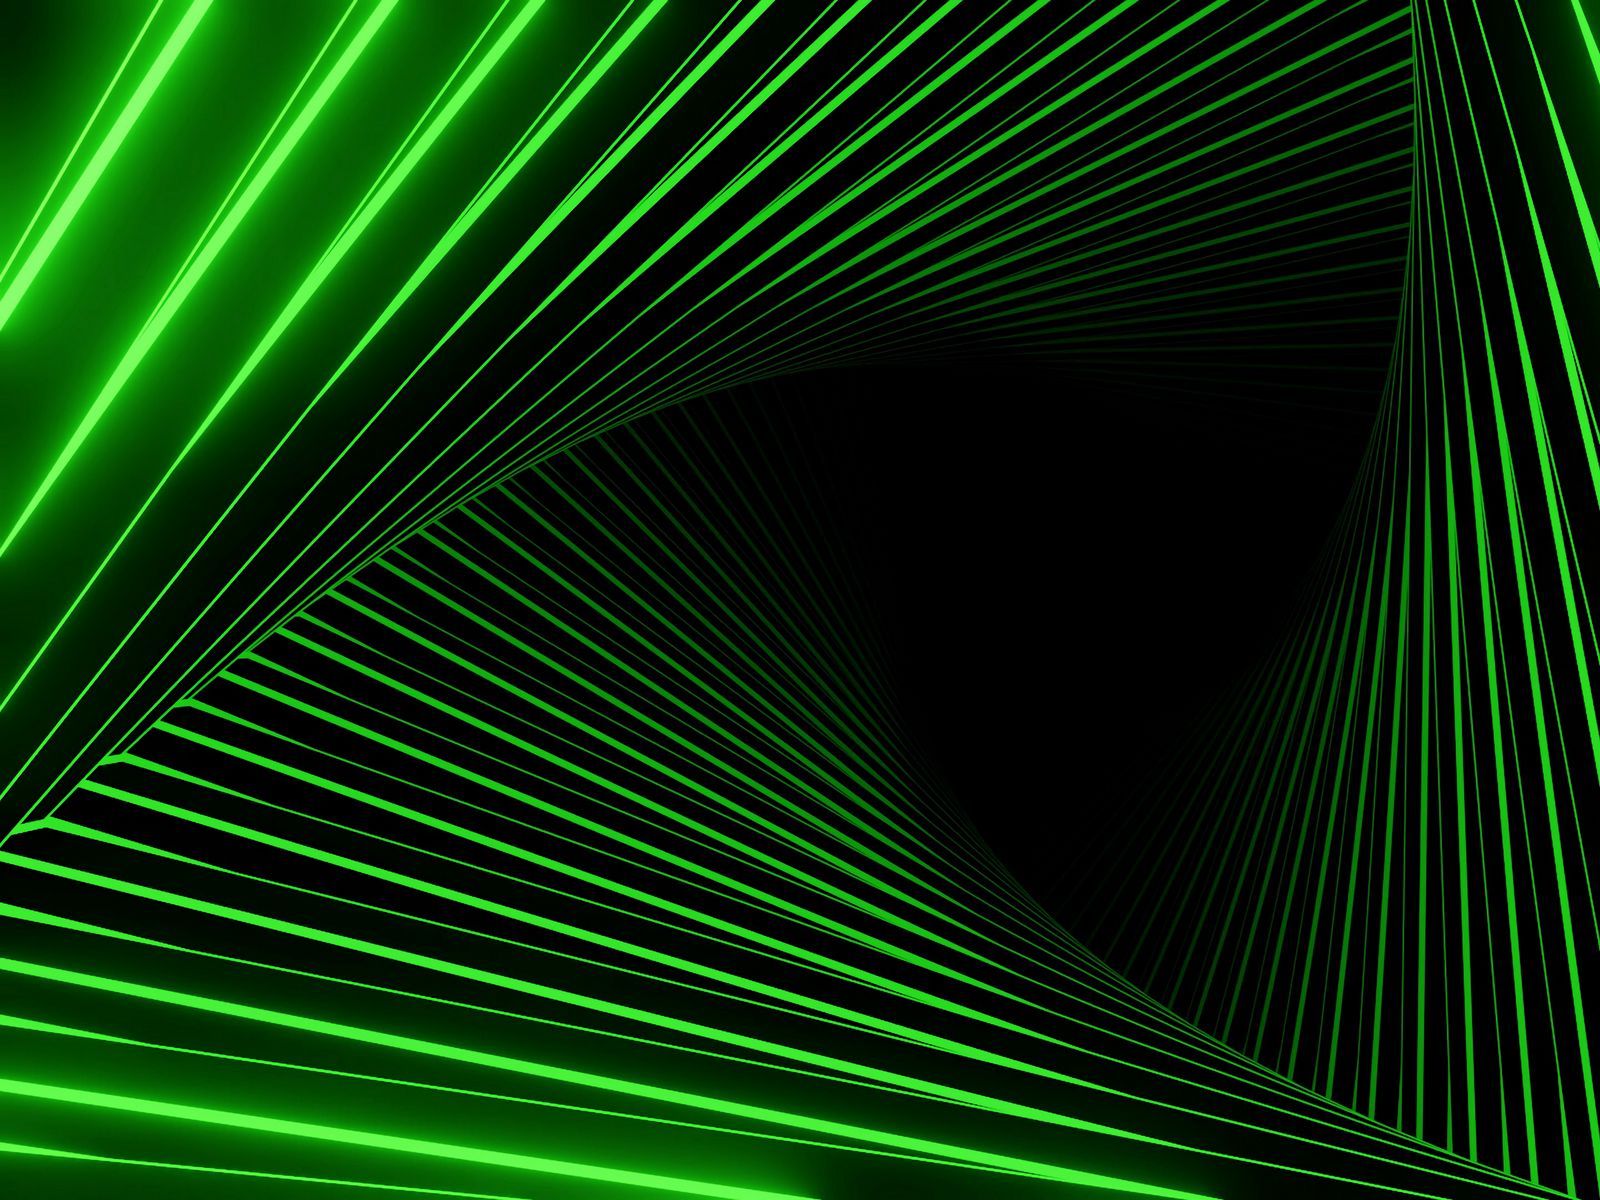 Download wallpaper 1600x1200 stripes, neon, acid, abstraction standard 4:3 HD background